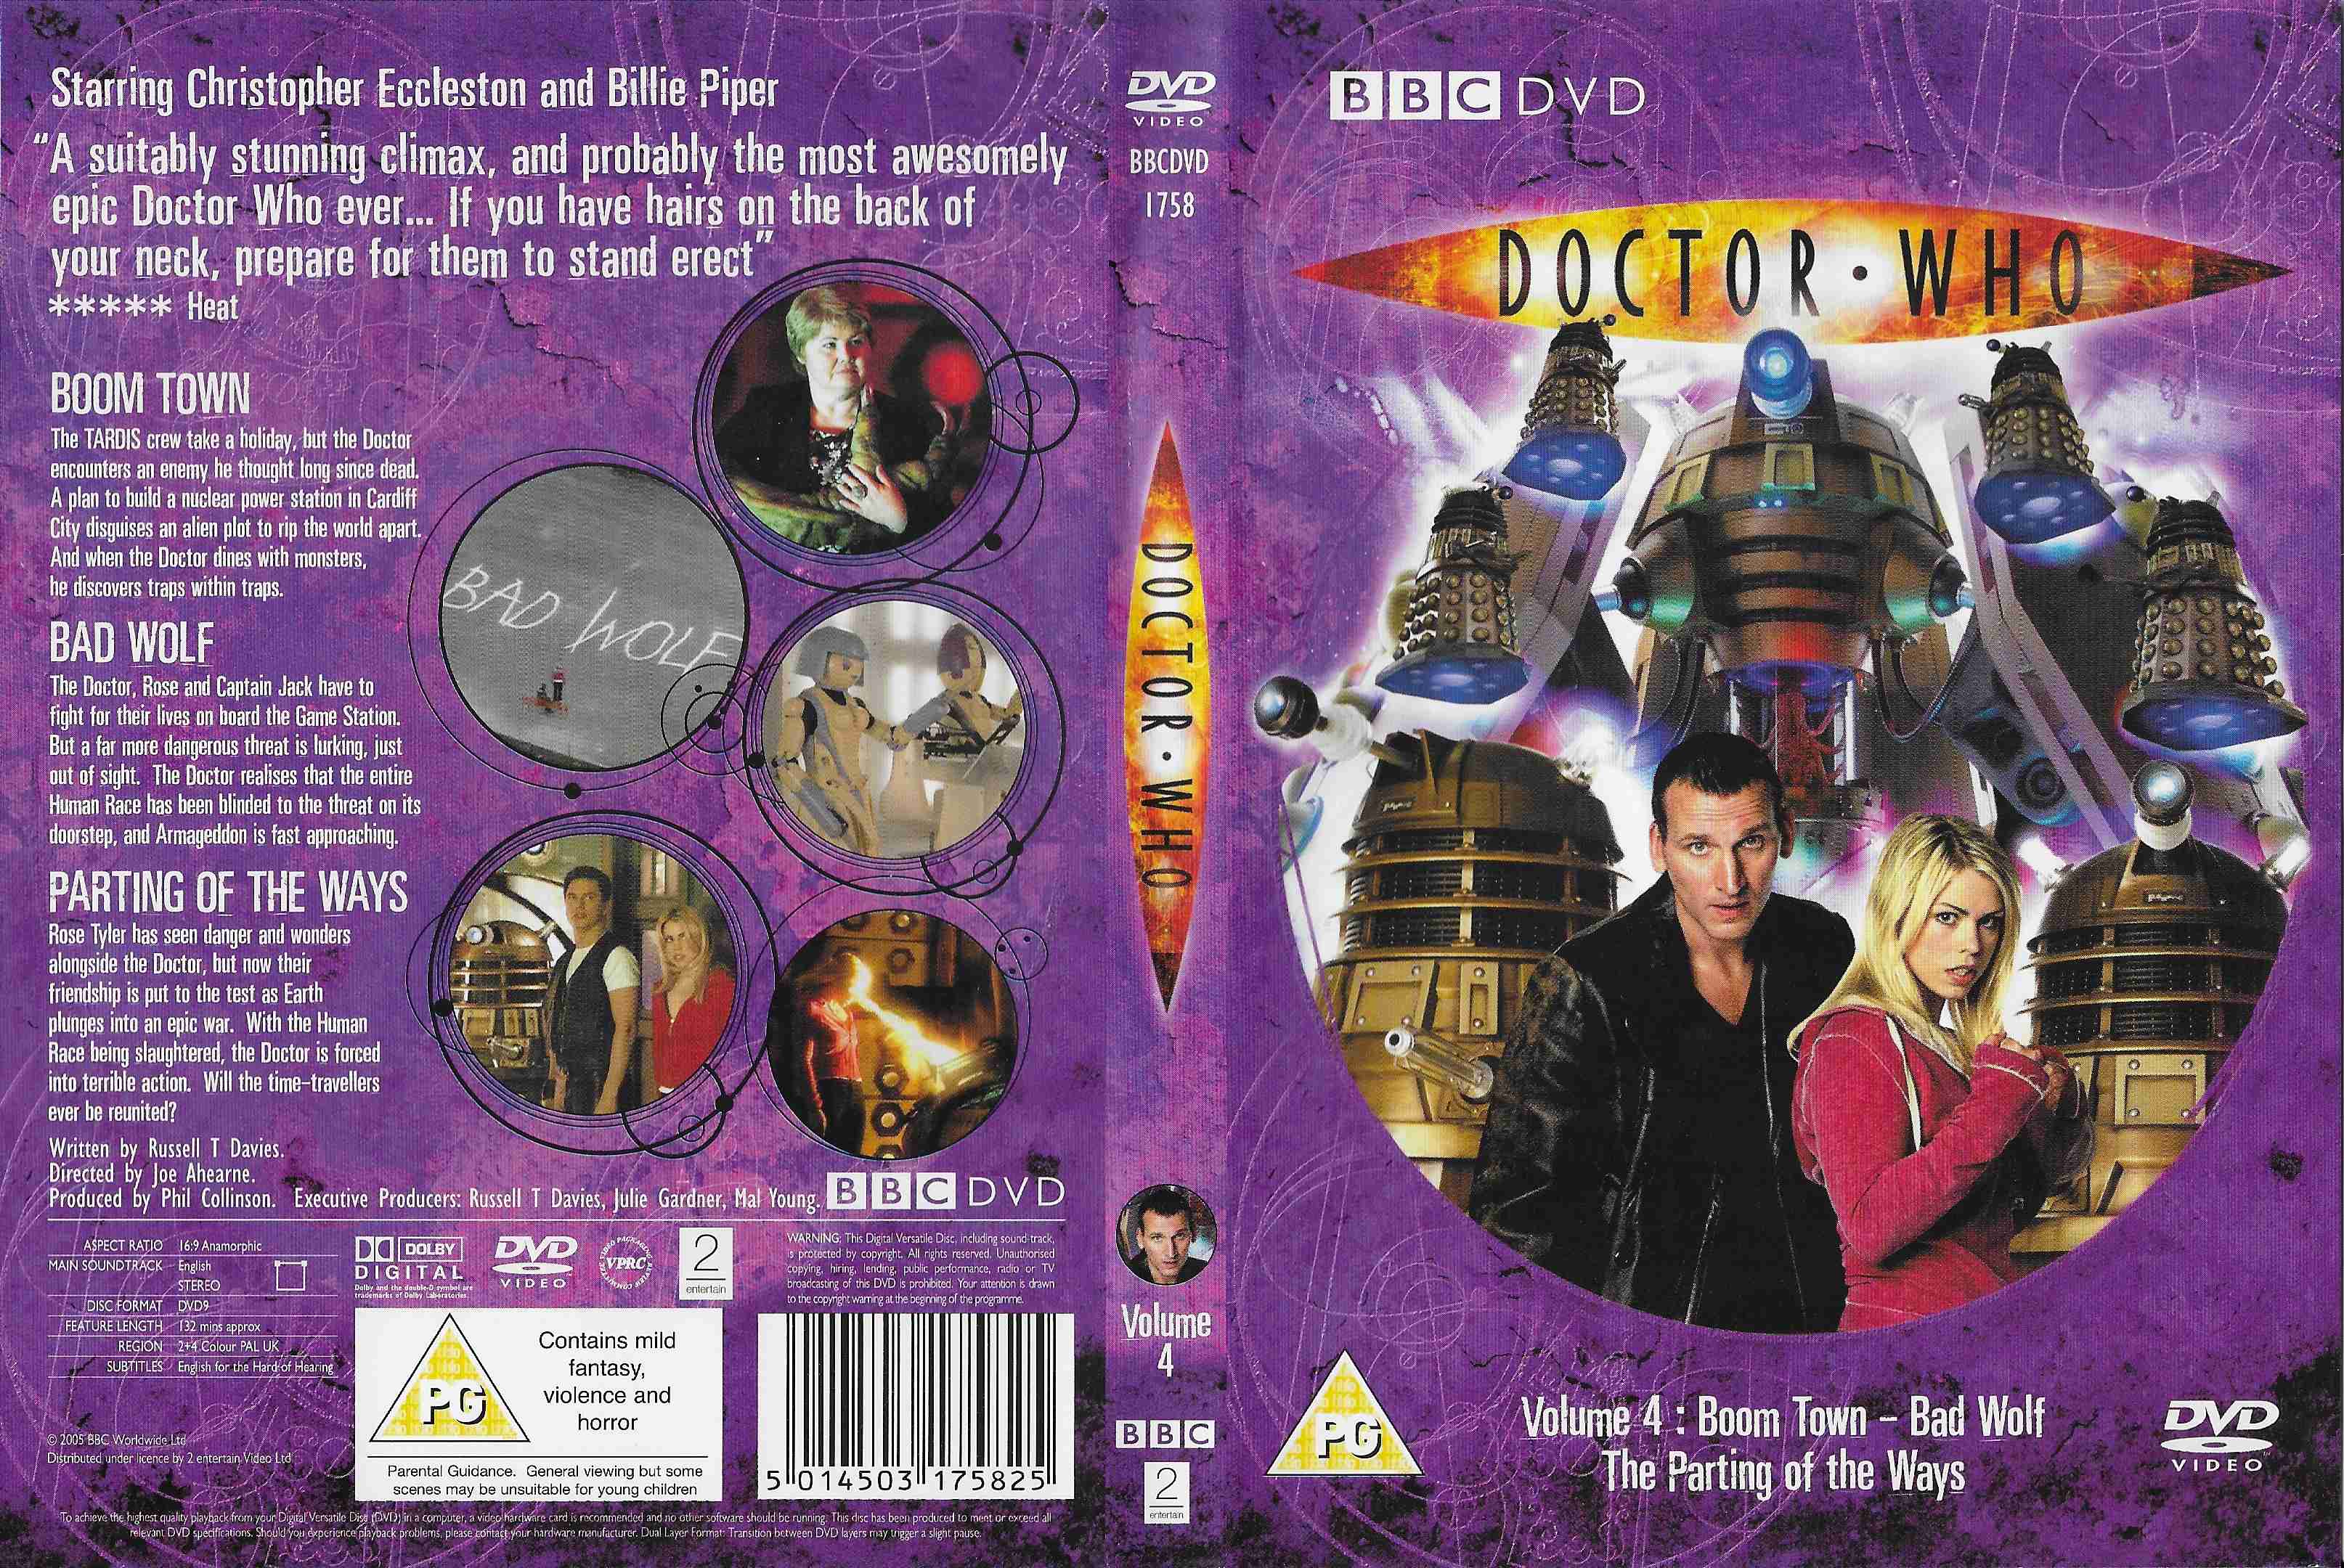 Picture of BBCDVD 1758 Doctor Who - New series, volume 4 by artist Russell T Davies from the BBC records and Tapes library